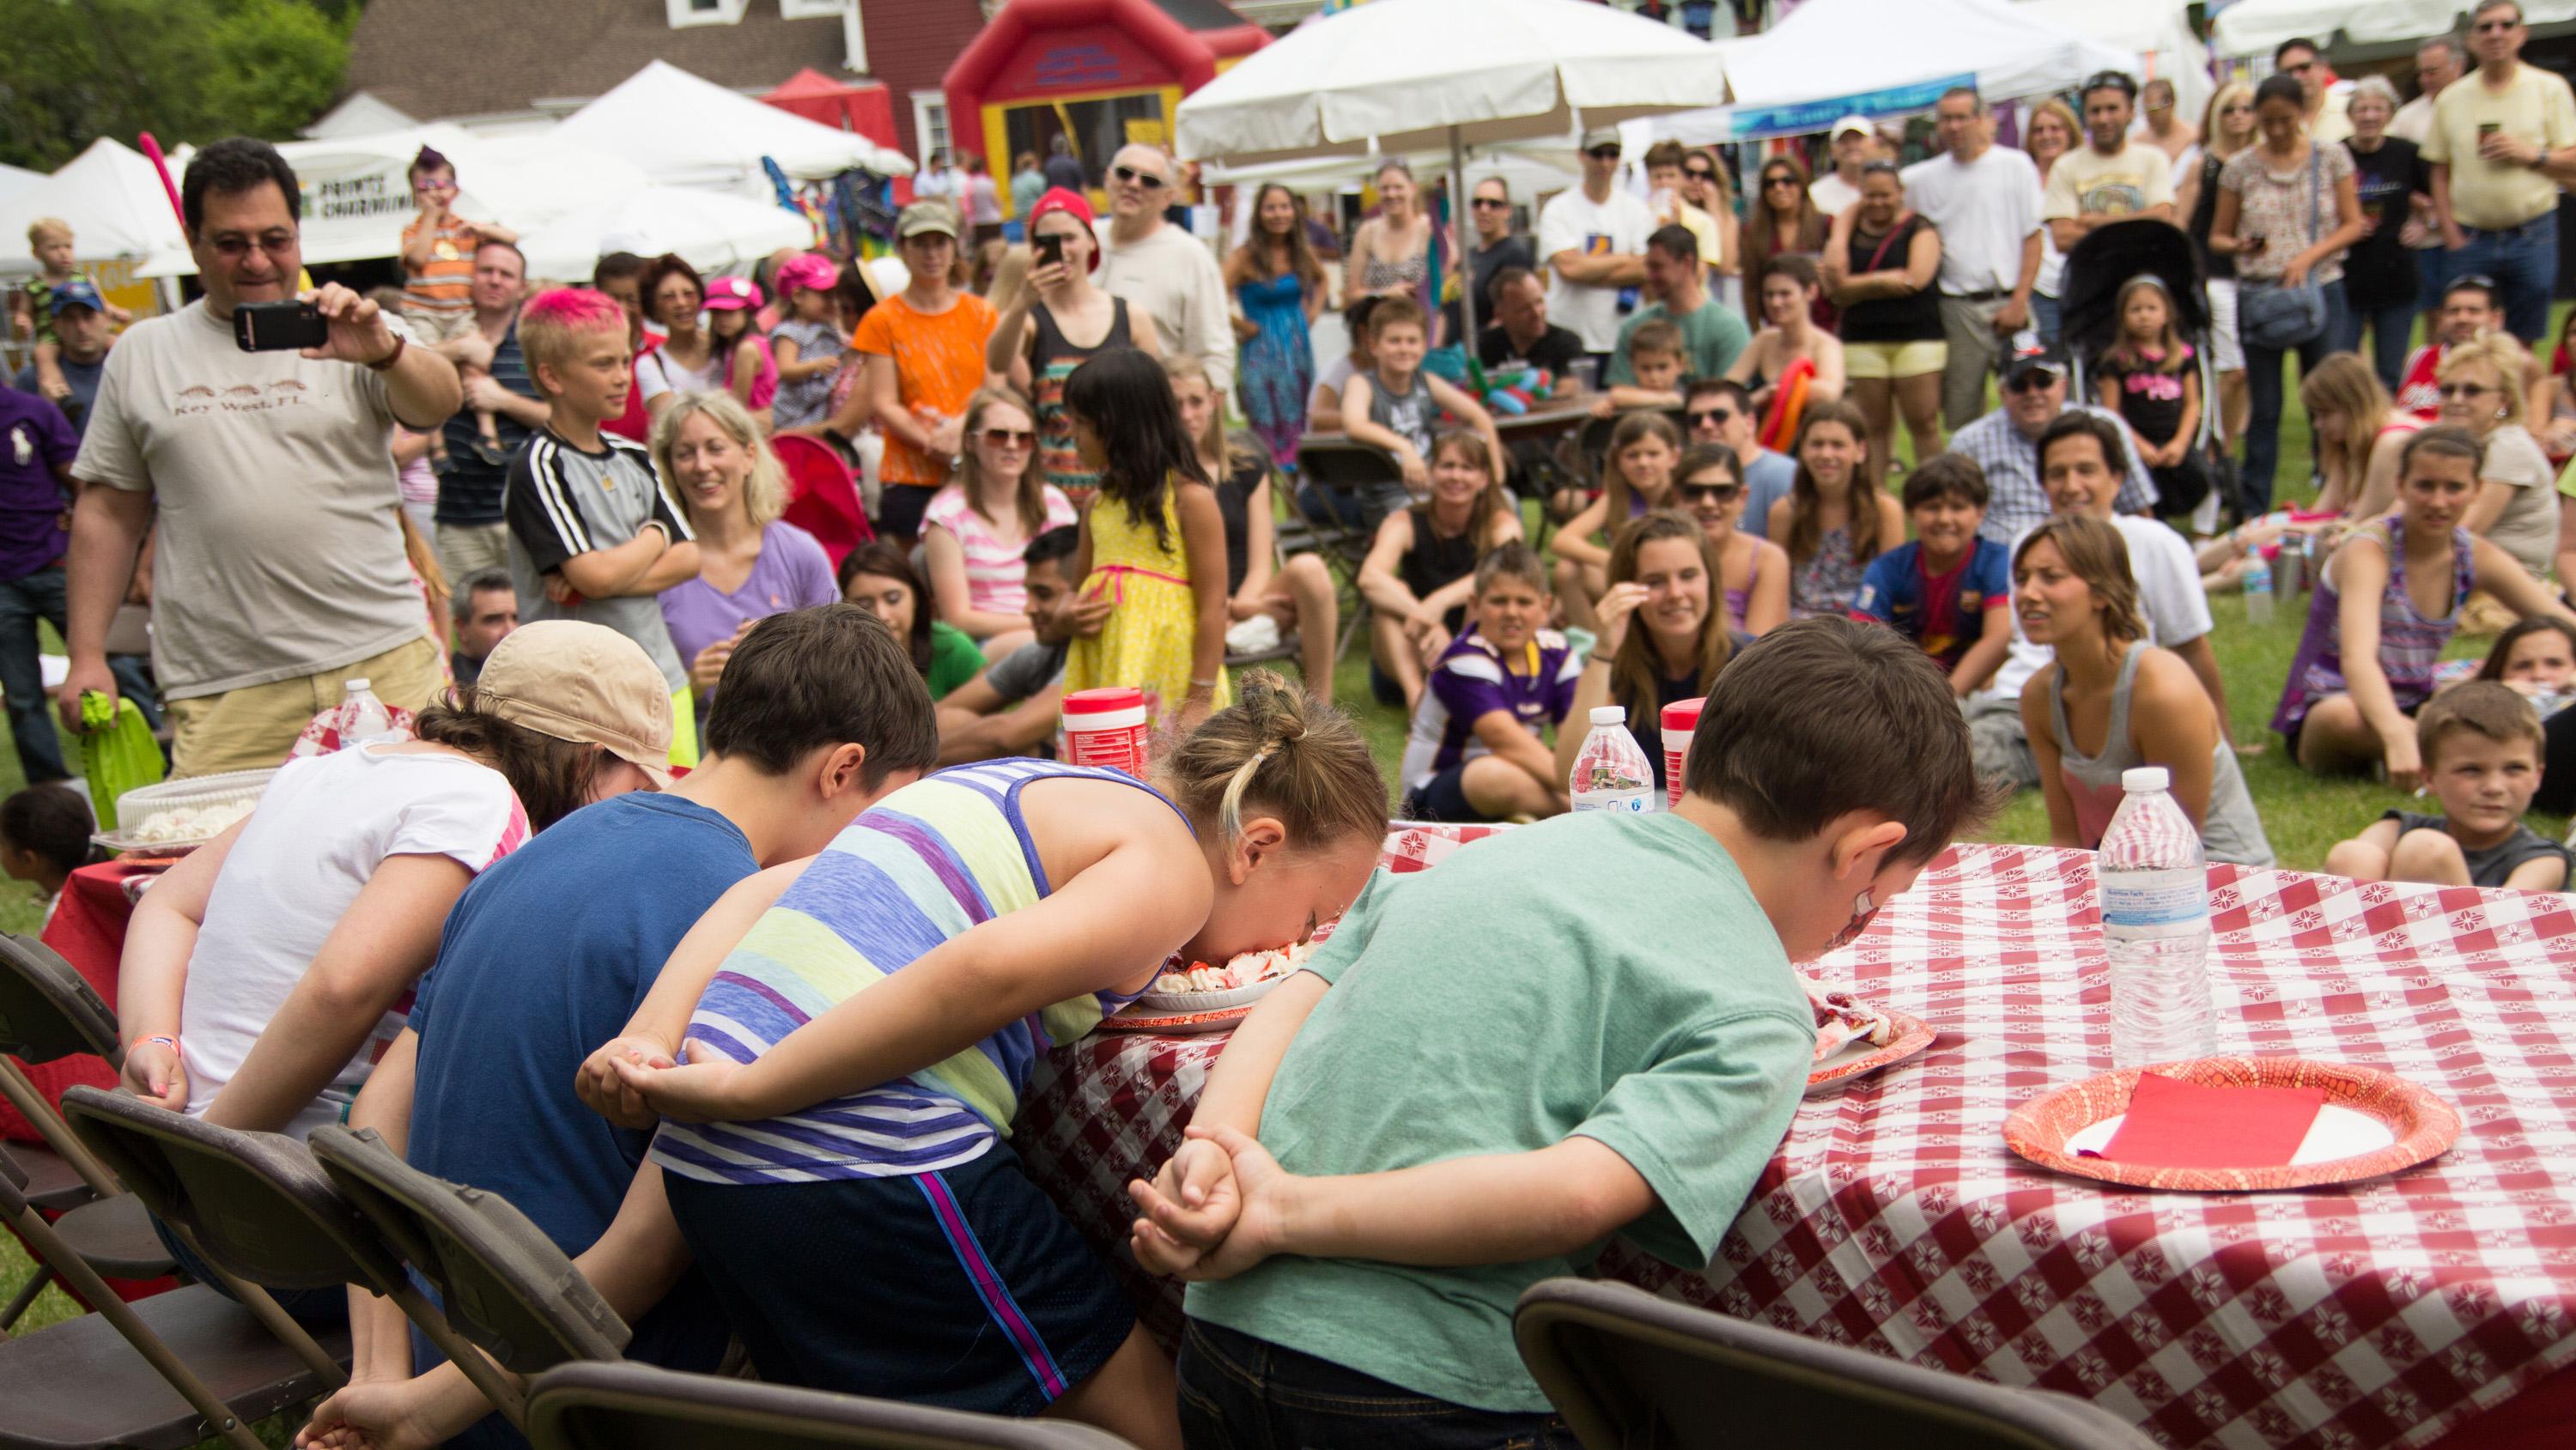 A strawberry pie-eating festival takes place at Strawberry Fest. (Courtesy of Jody Grimaldi)